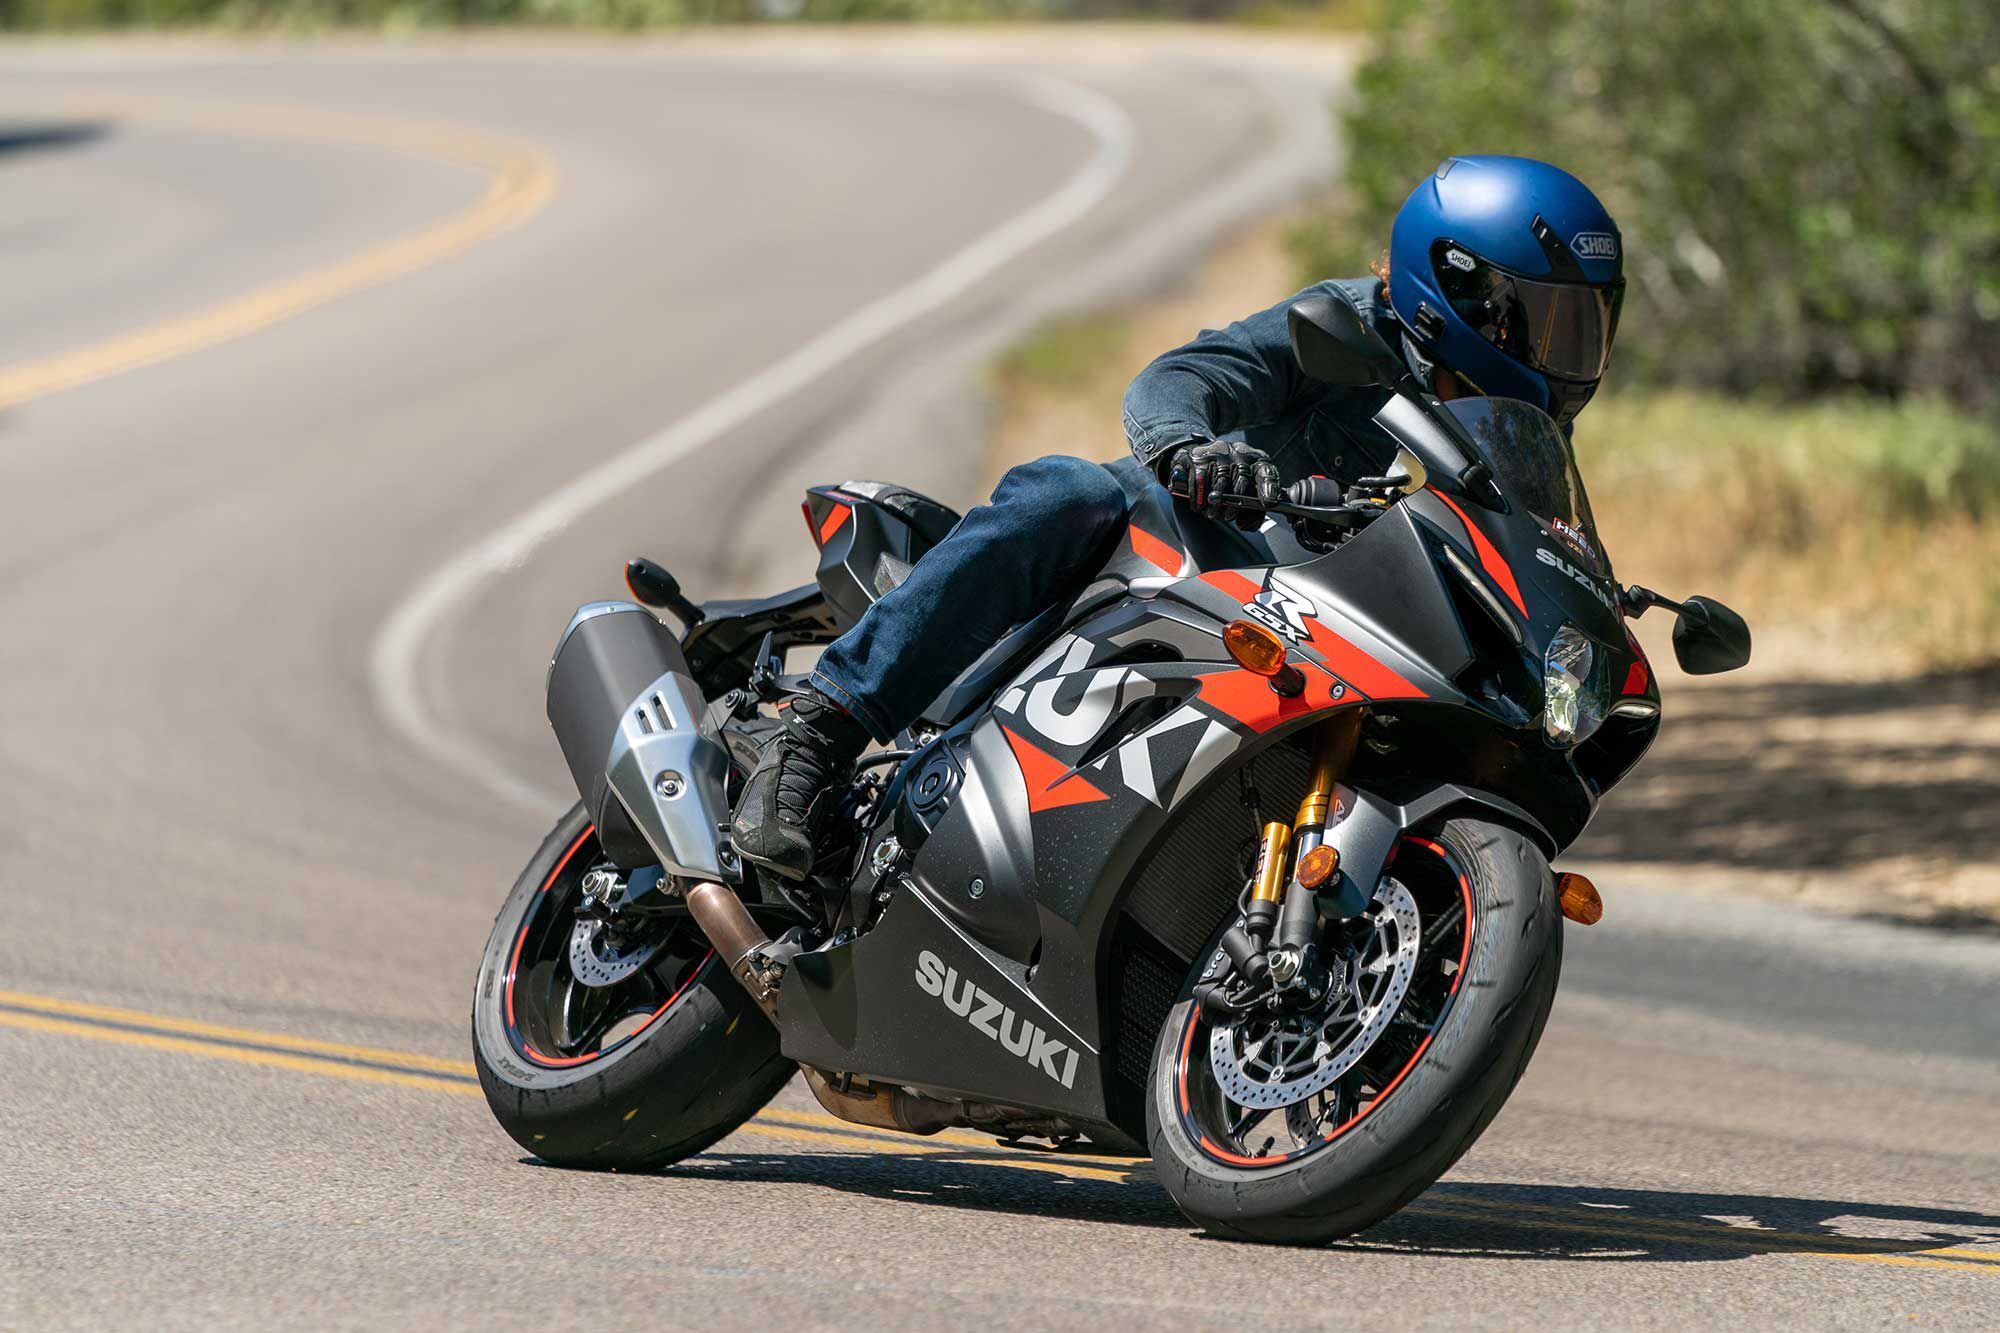 Suzuki’s GSX-R1000R impresses with its high-level of agility. It dances well for a 445-pound motorcycle.